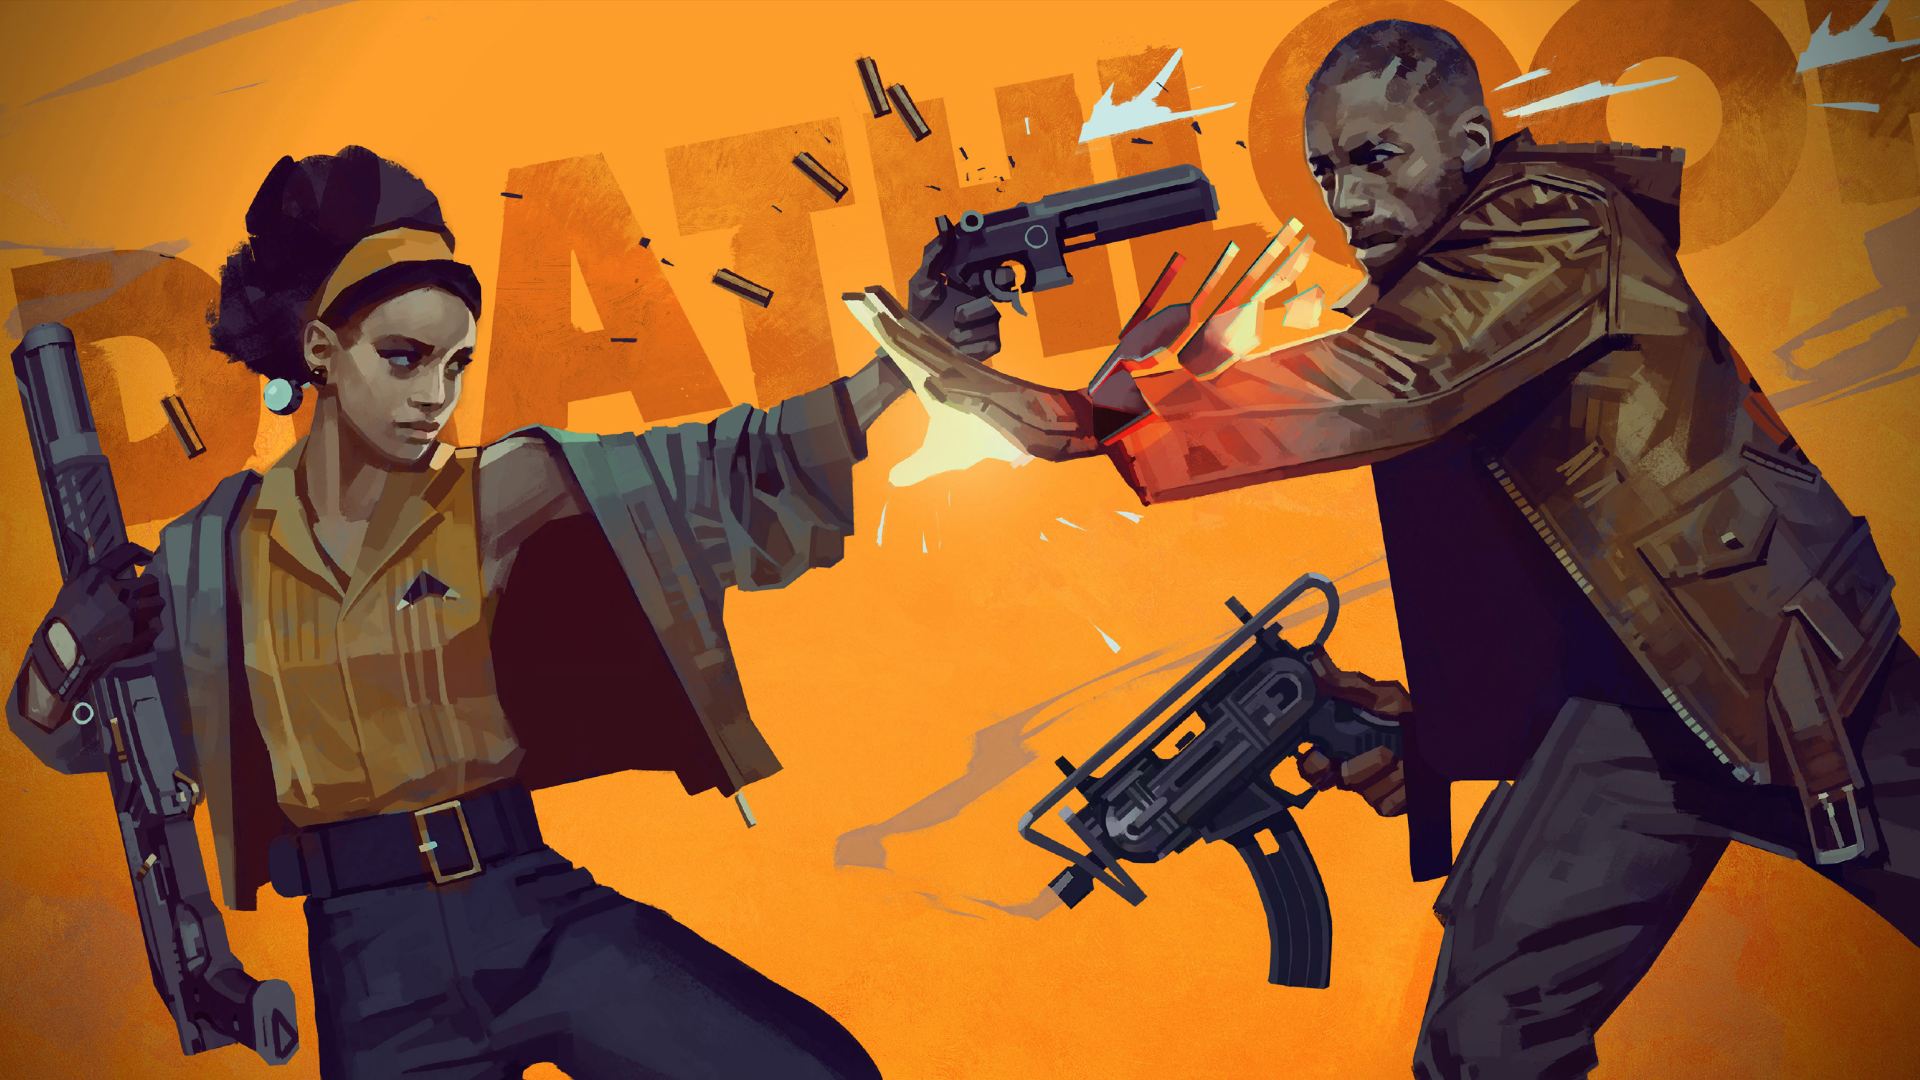 Deathloop: Colt and Juliana can be seen in key art for the game